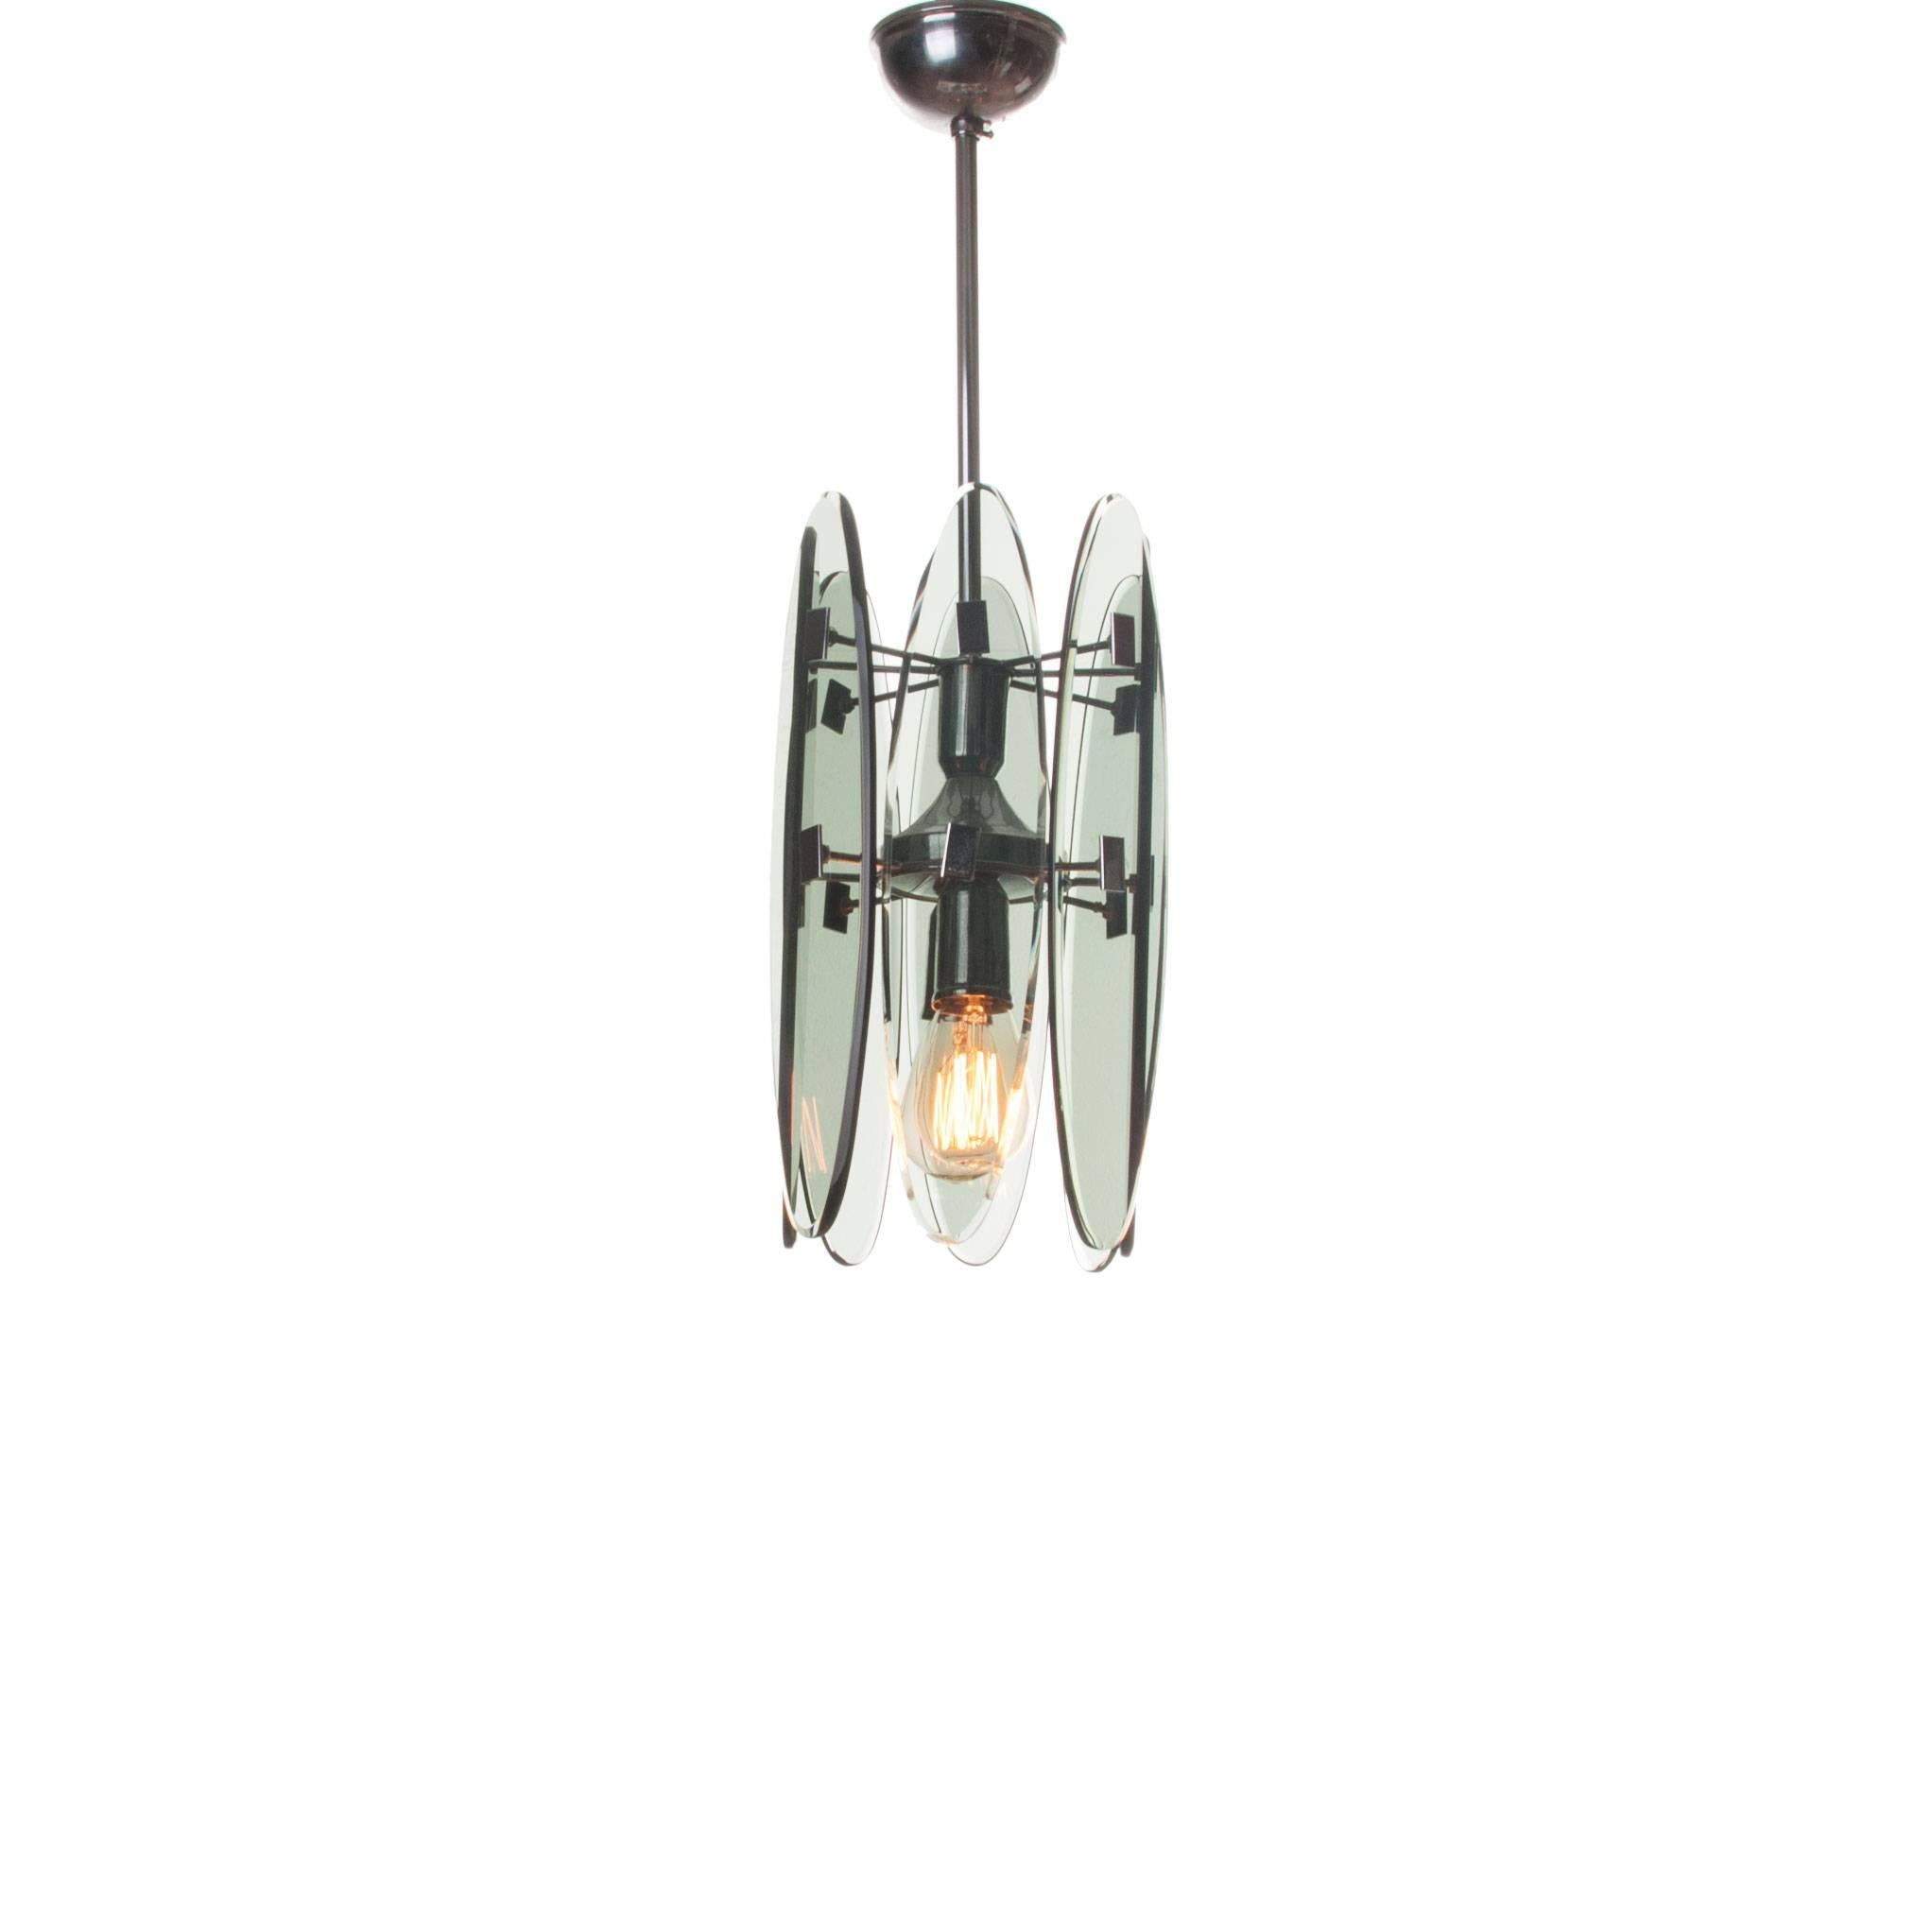 1970s Chrome and Glass Pendant Attributed to Veca For Sale 1